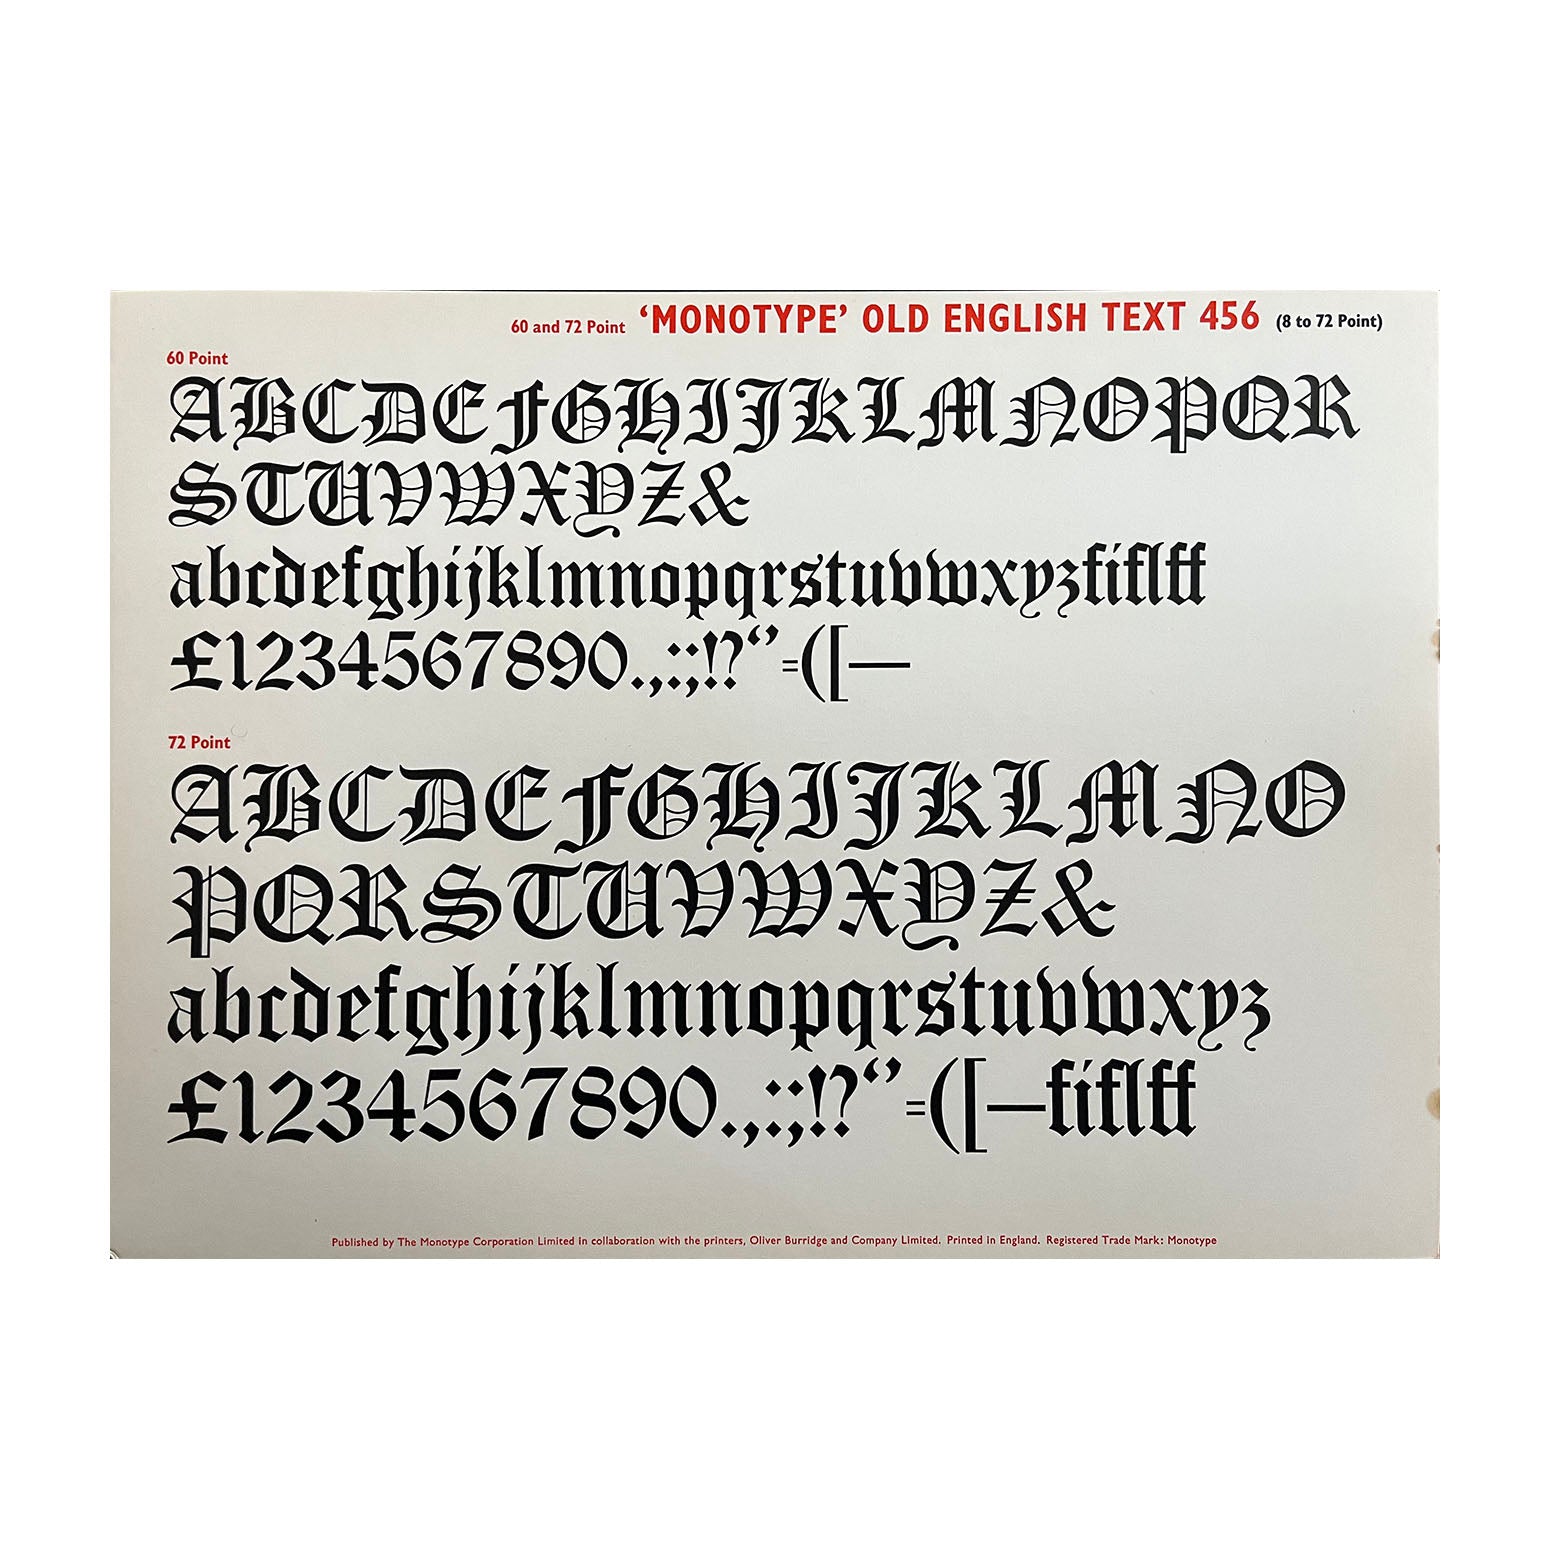 An original printer’s sample sheet, Old English Text 456 (8 to 72 Point), published by the Monotype Corporation Ltd